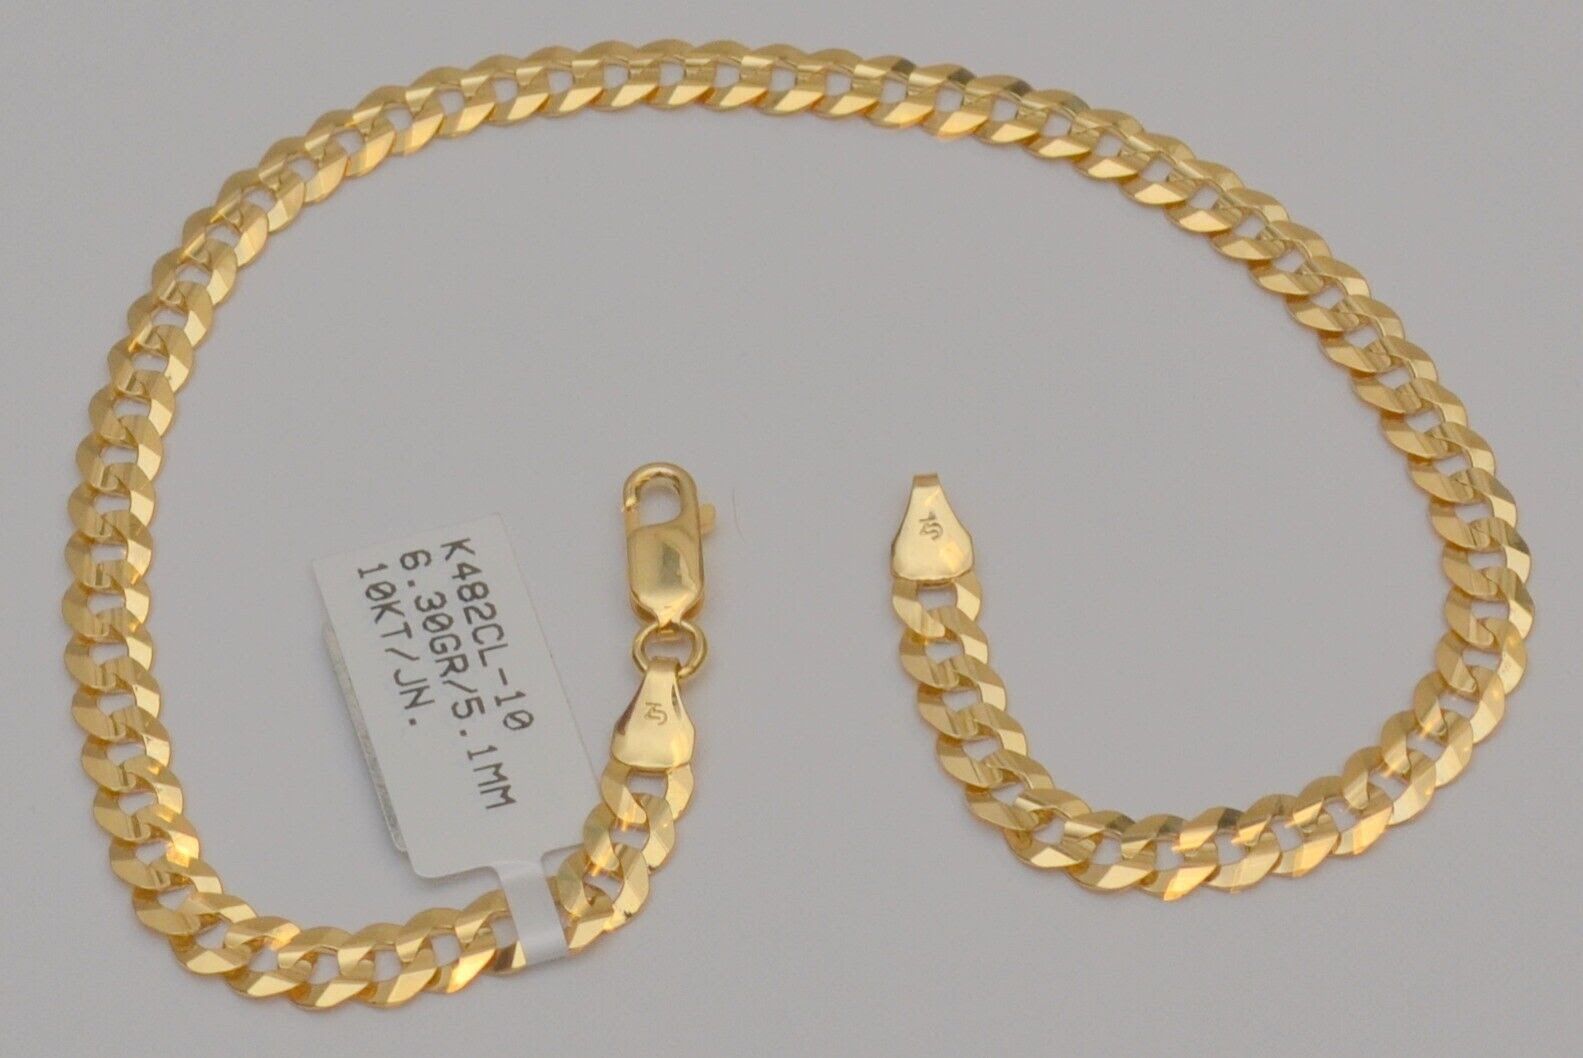 Gold chain 10k solid yellow cuban curb link anklet bracelet 10 in 5.0 mm 6.2 gr